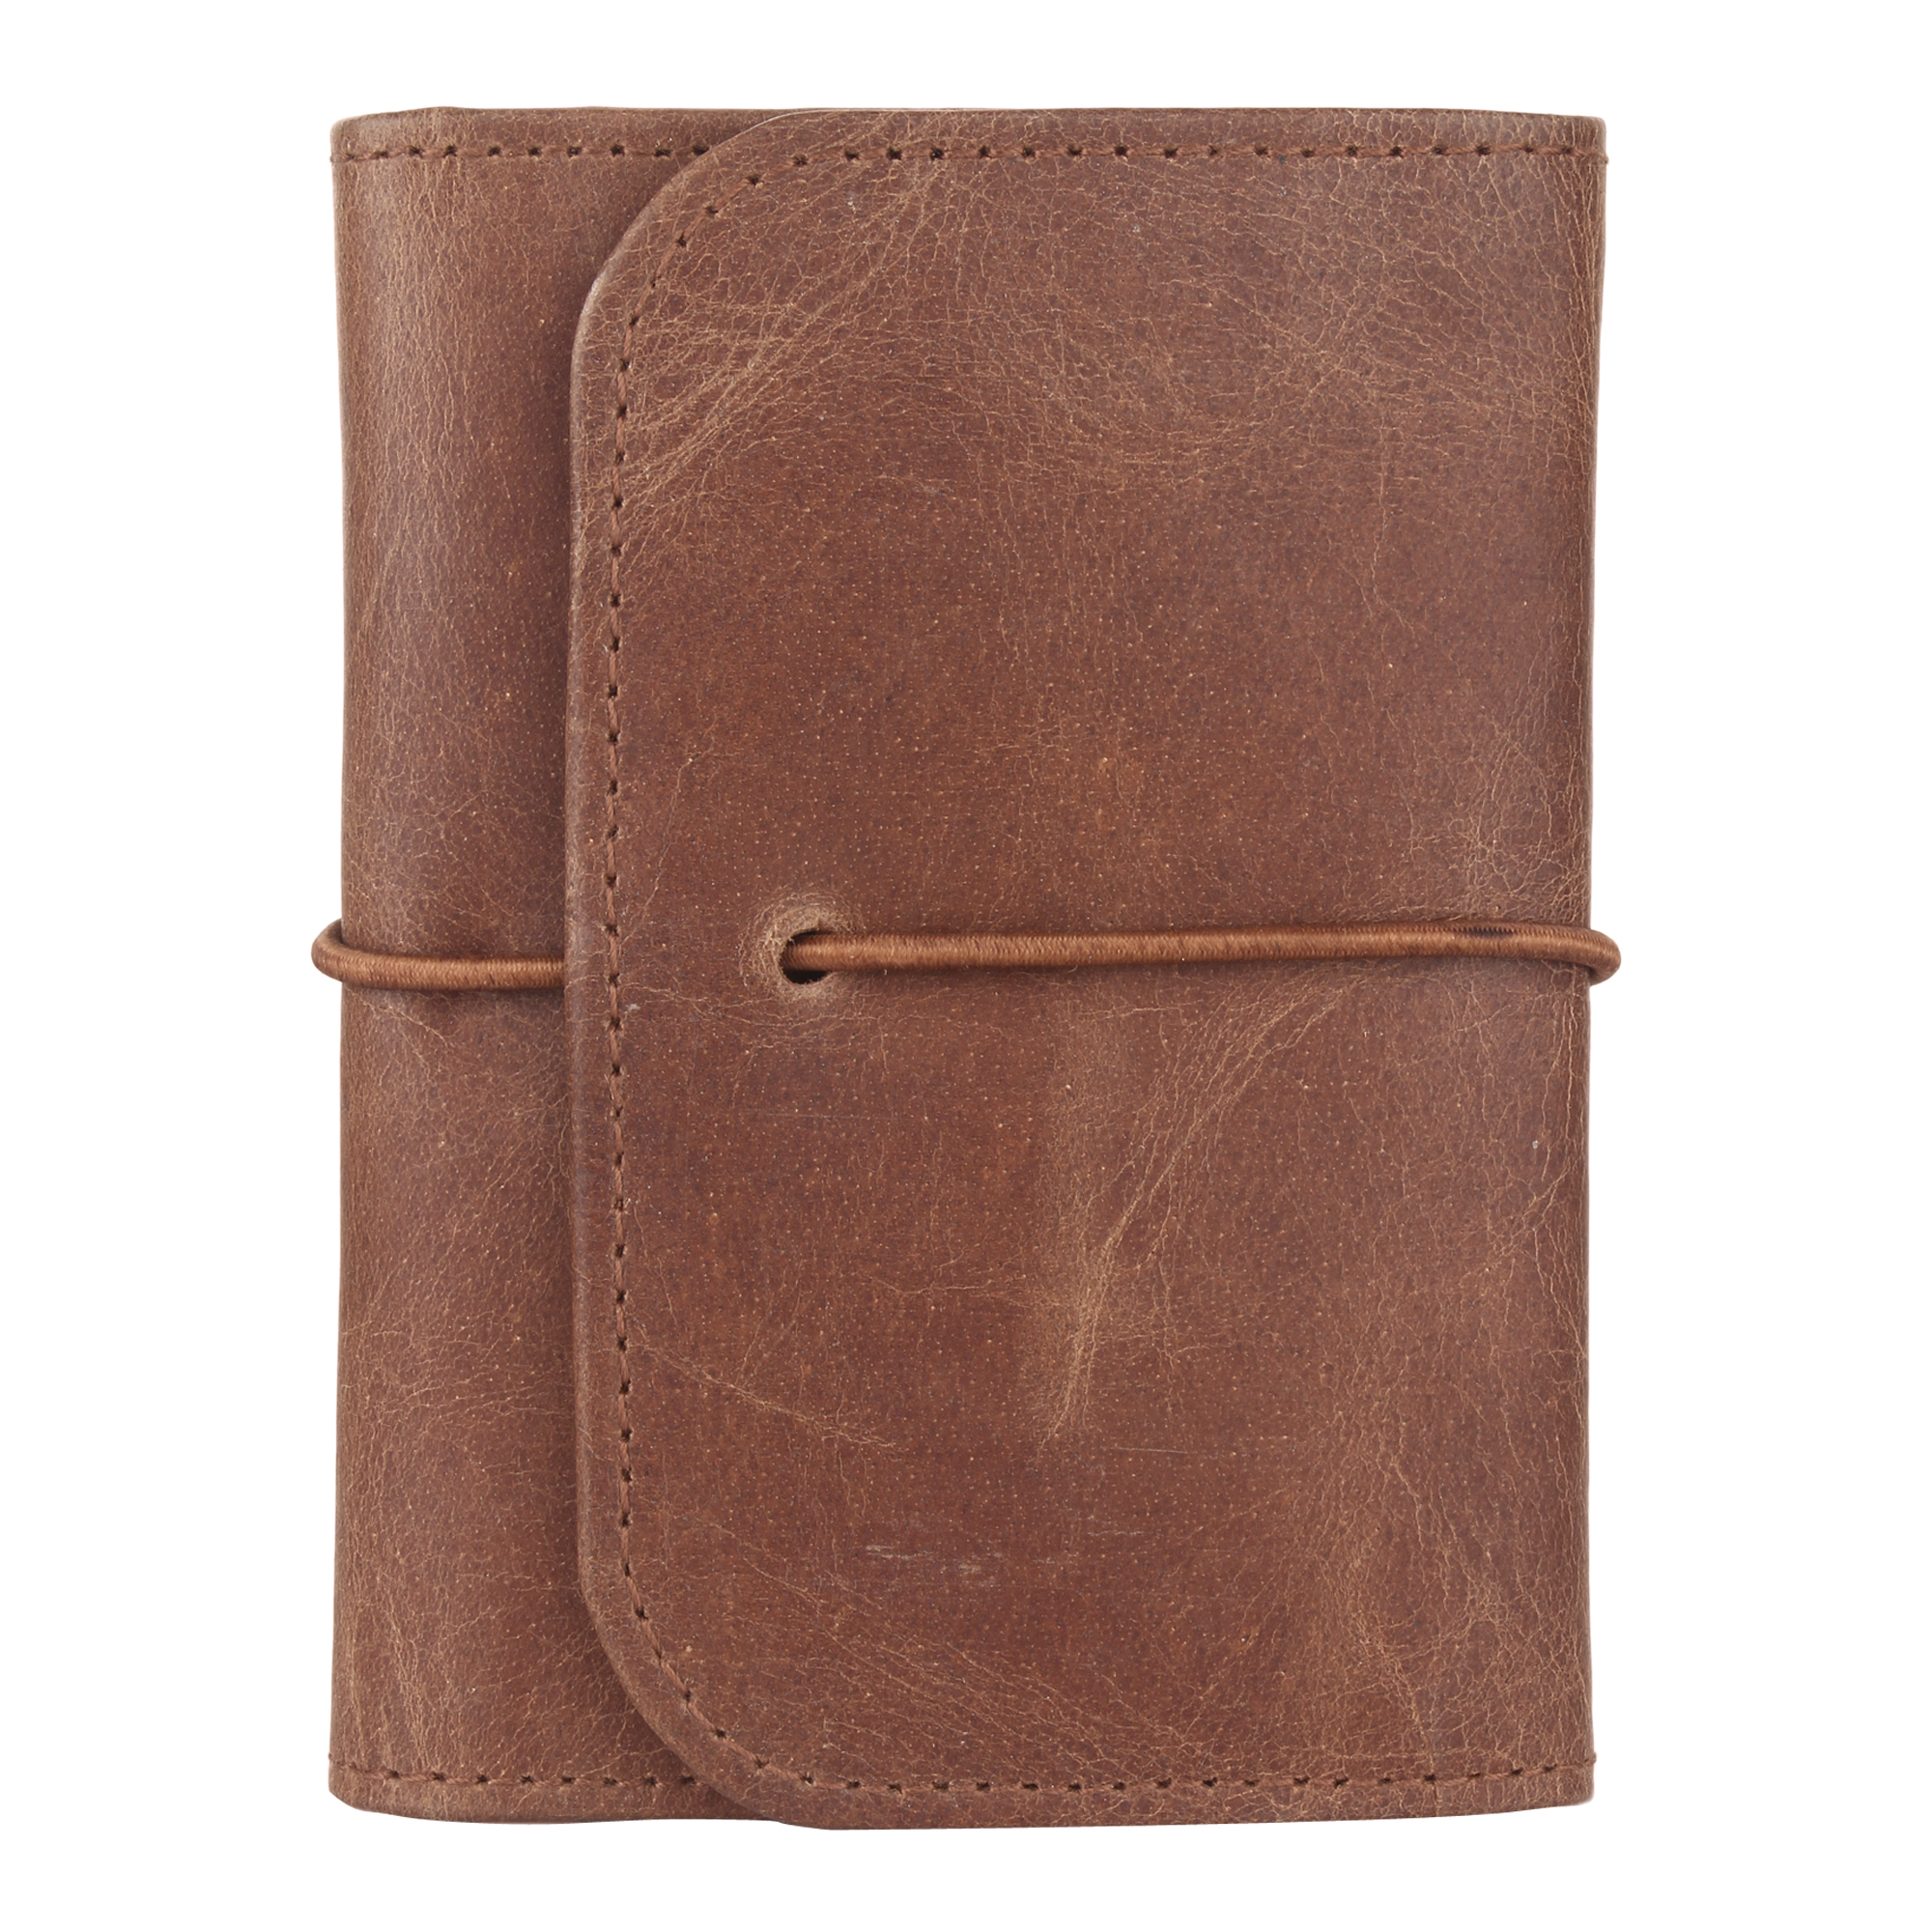 Leather Card Holder Wallet Manufacturers In Delhi, Card Holder Wallet Suppliers In Delhi, Card Holder Wallet Wholesalers In Delhi, Card Holder Wallet Traders In Delhi 